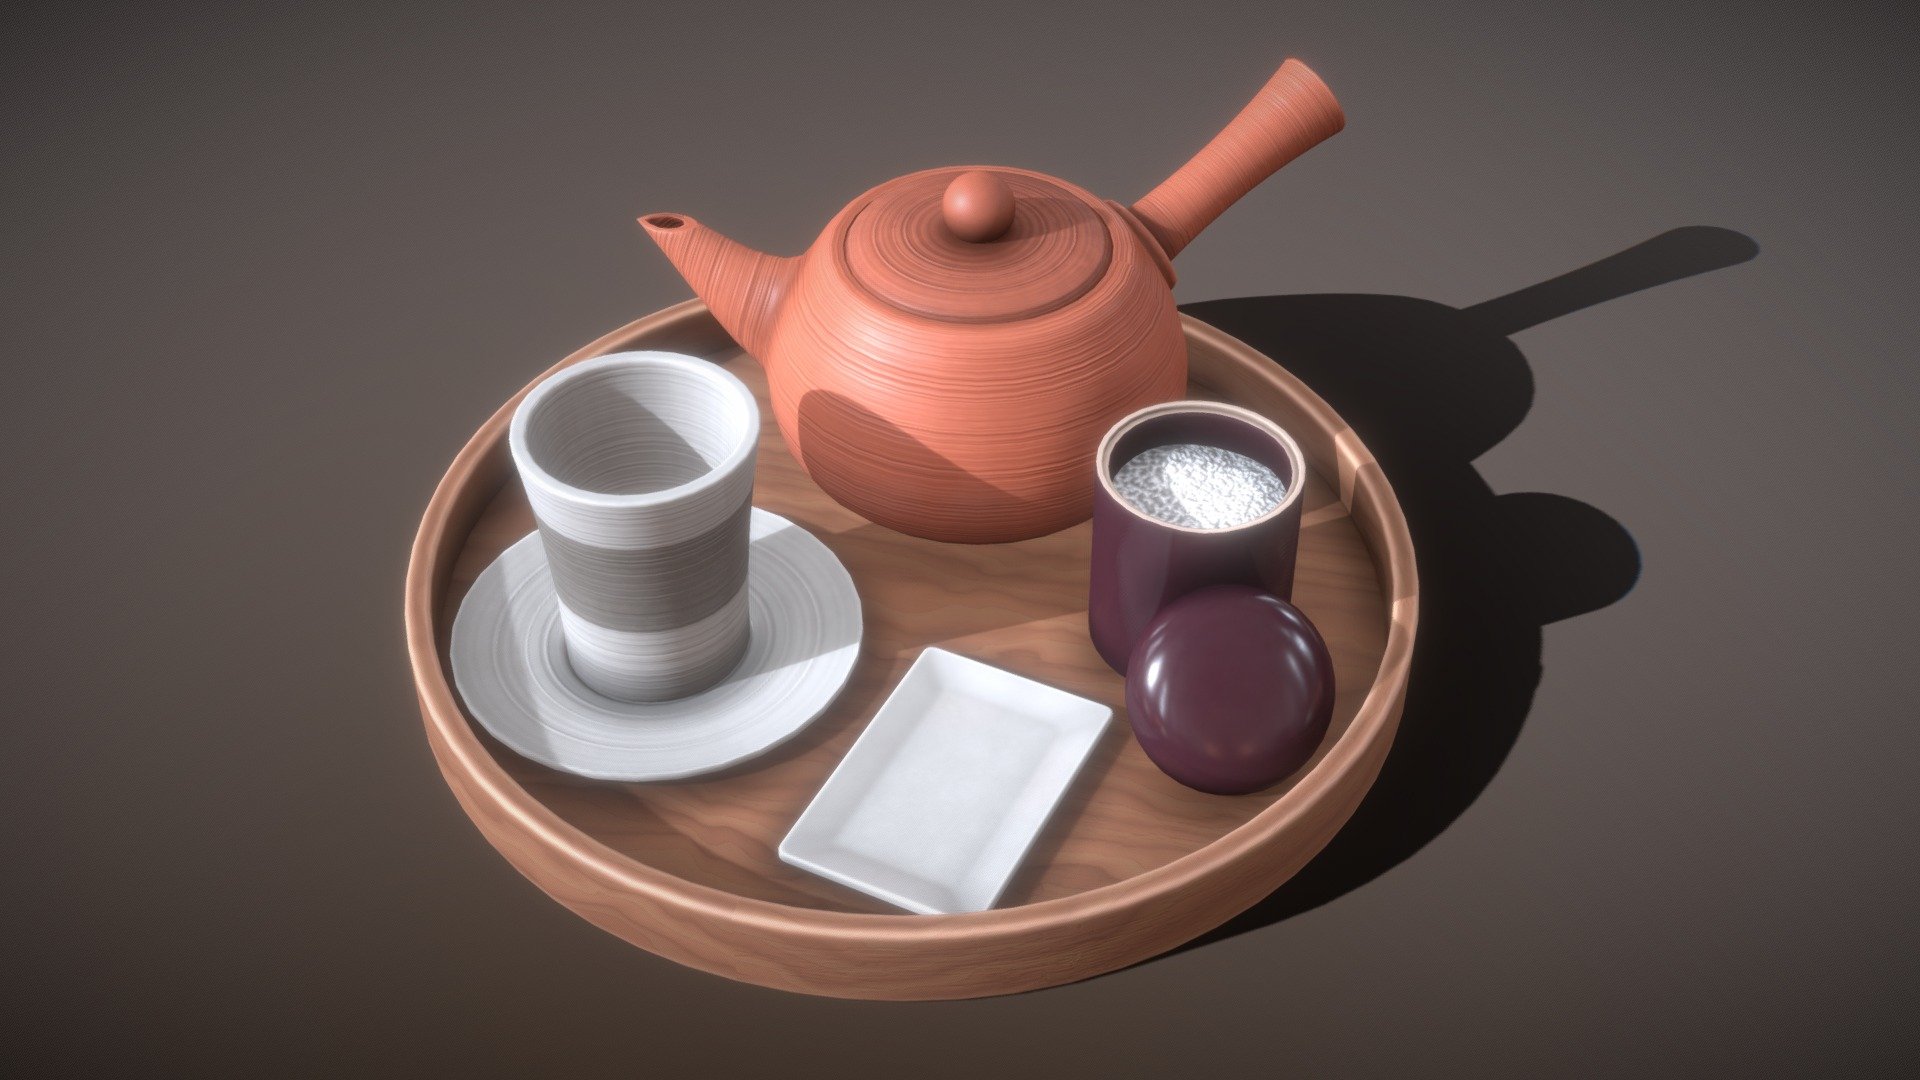 Japanese porcelain tea set in black and red with functioanl bowls and pot on a tablet

Dimension: 85.795cm x 36.337cm x 48.697cm 
Typ: Static mesh
Texture: one single set, no alternative versions 
Materials: one in PBR style - Japanese Furniture Kit - Tea Pot - 3D model by DuoDraconis 3d model